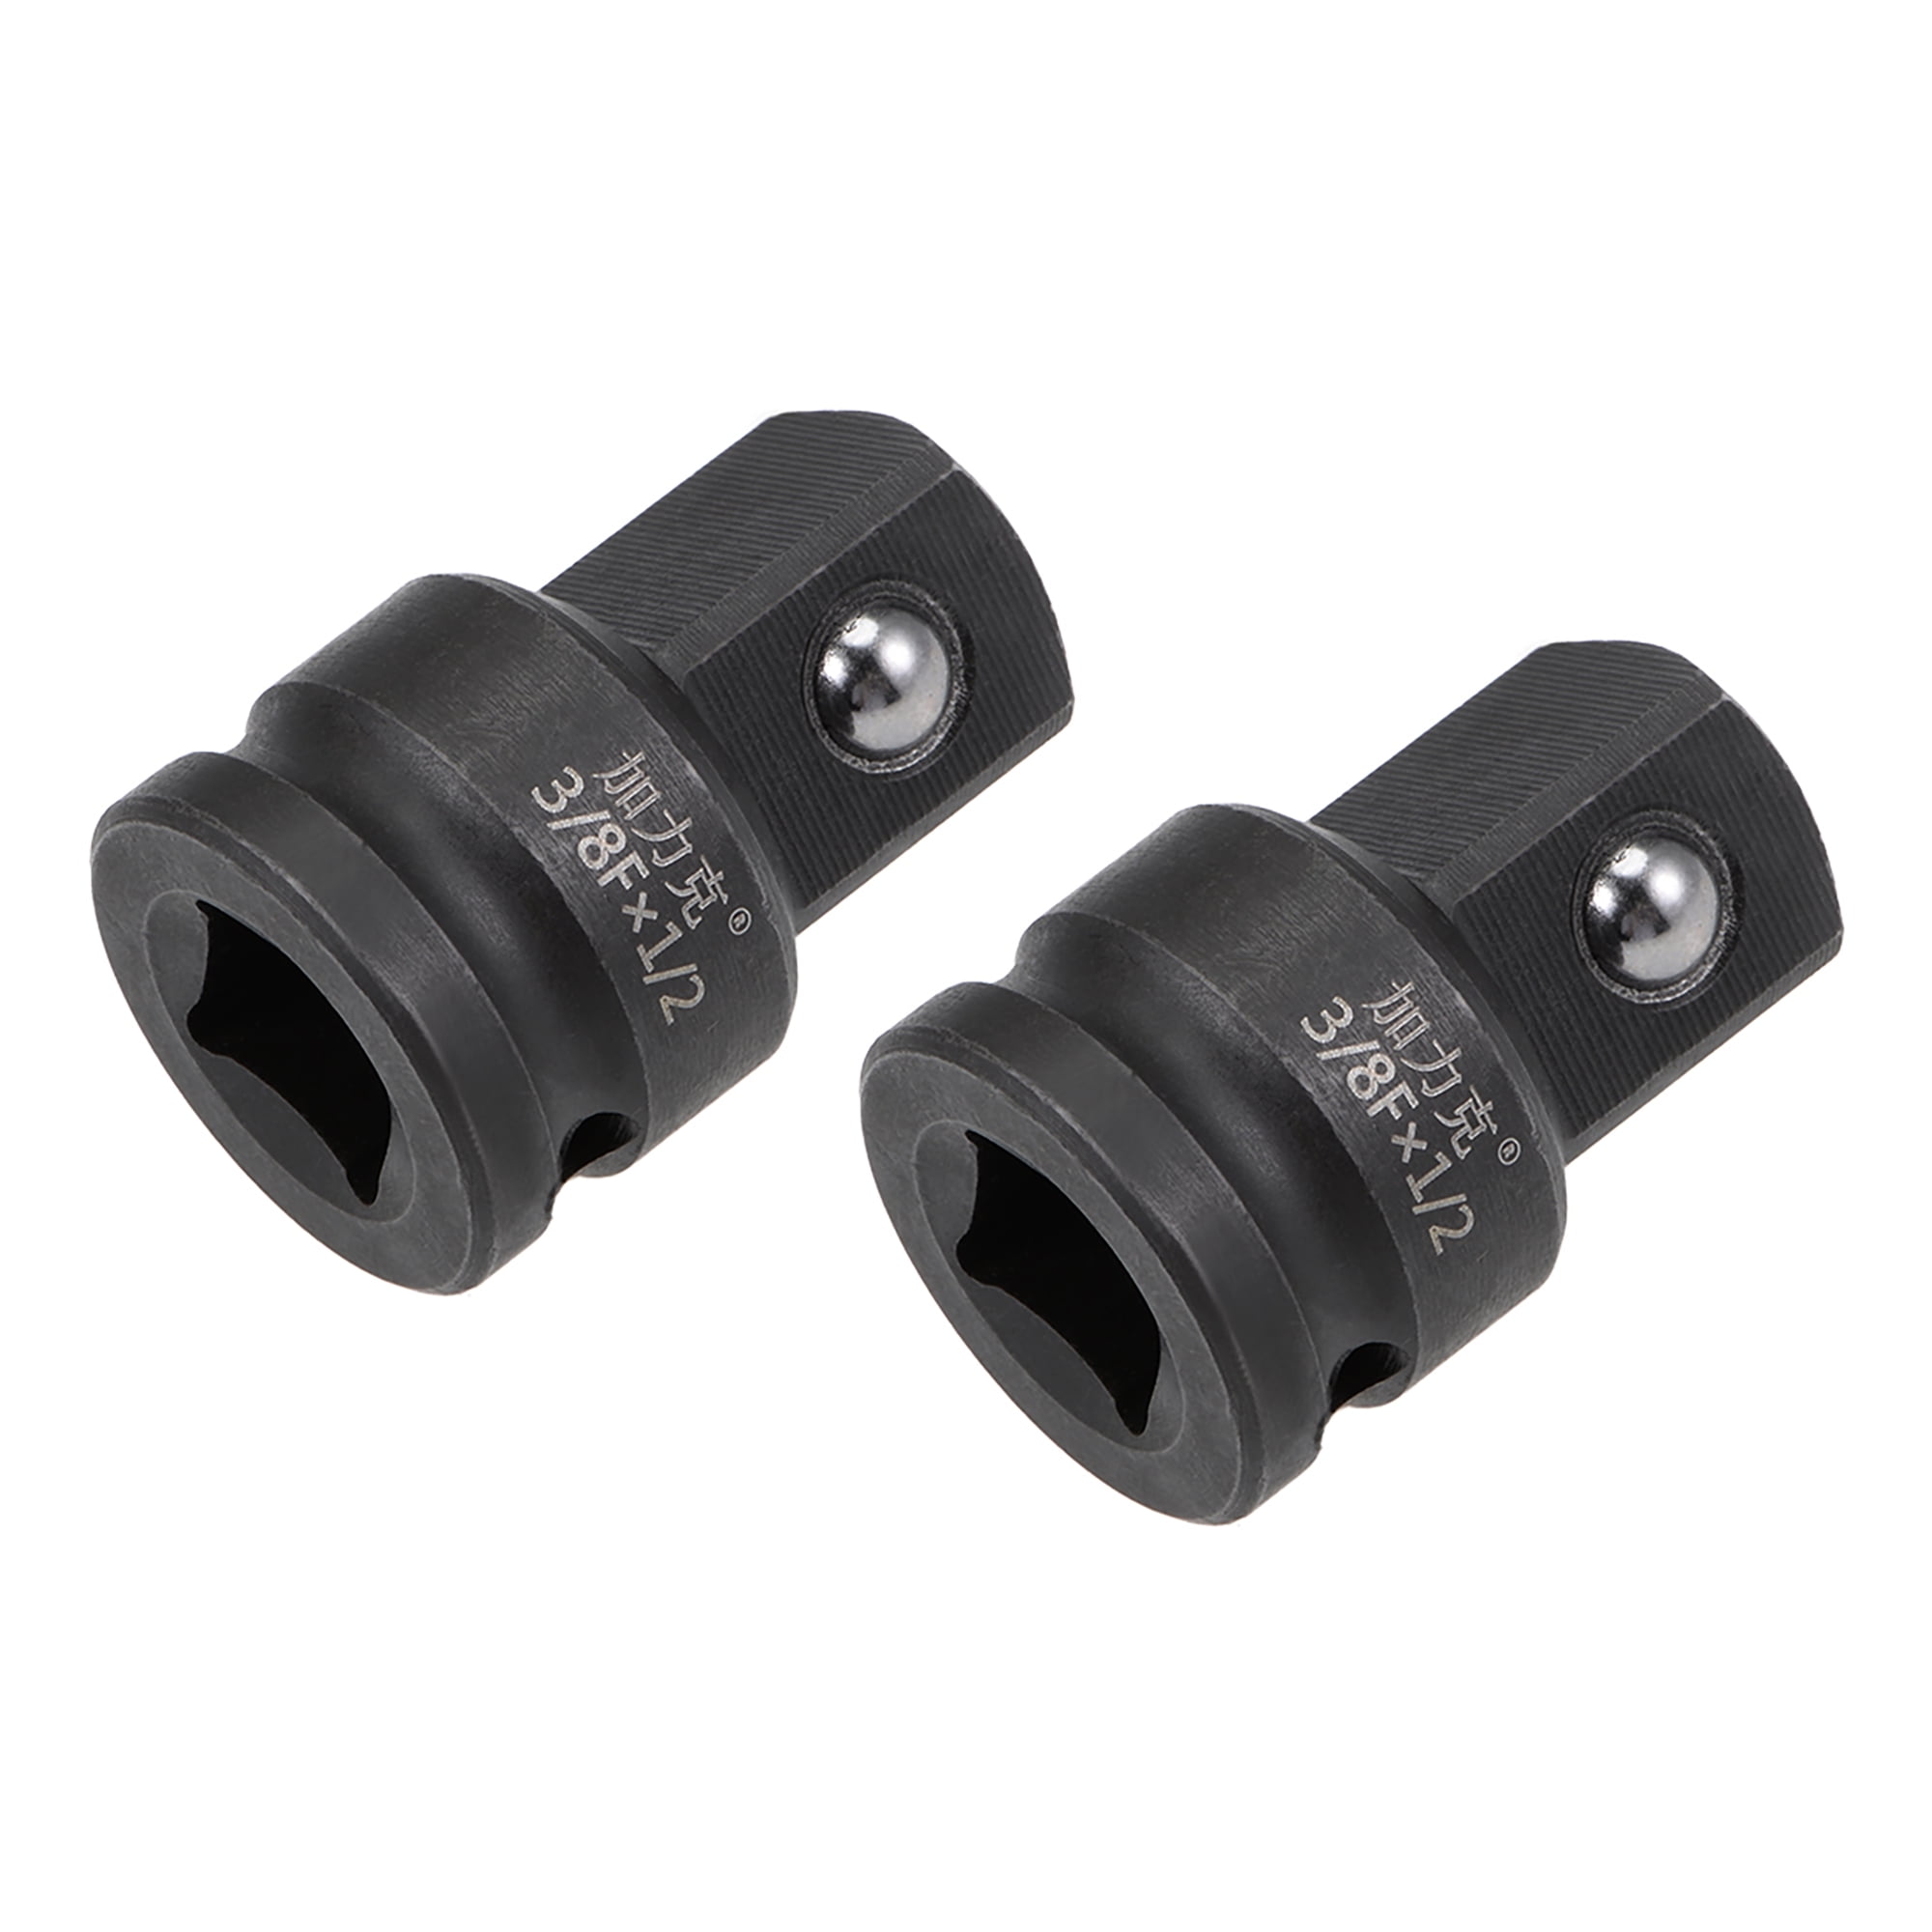 2pc SET 1/2 to 3/8 SOCKET REDUCER ADAPTERS IMPACT CR-M 